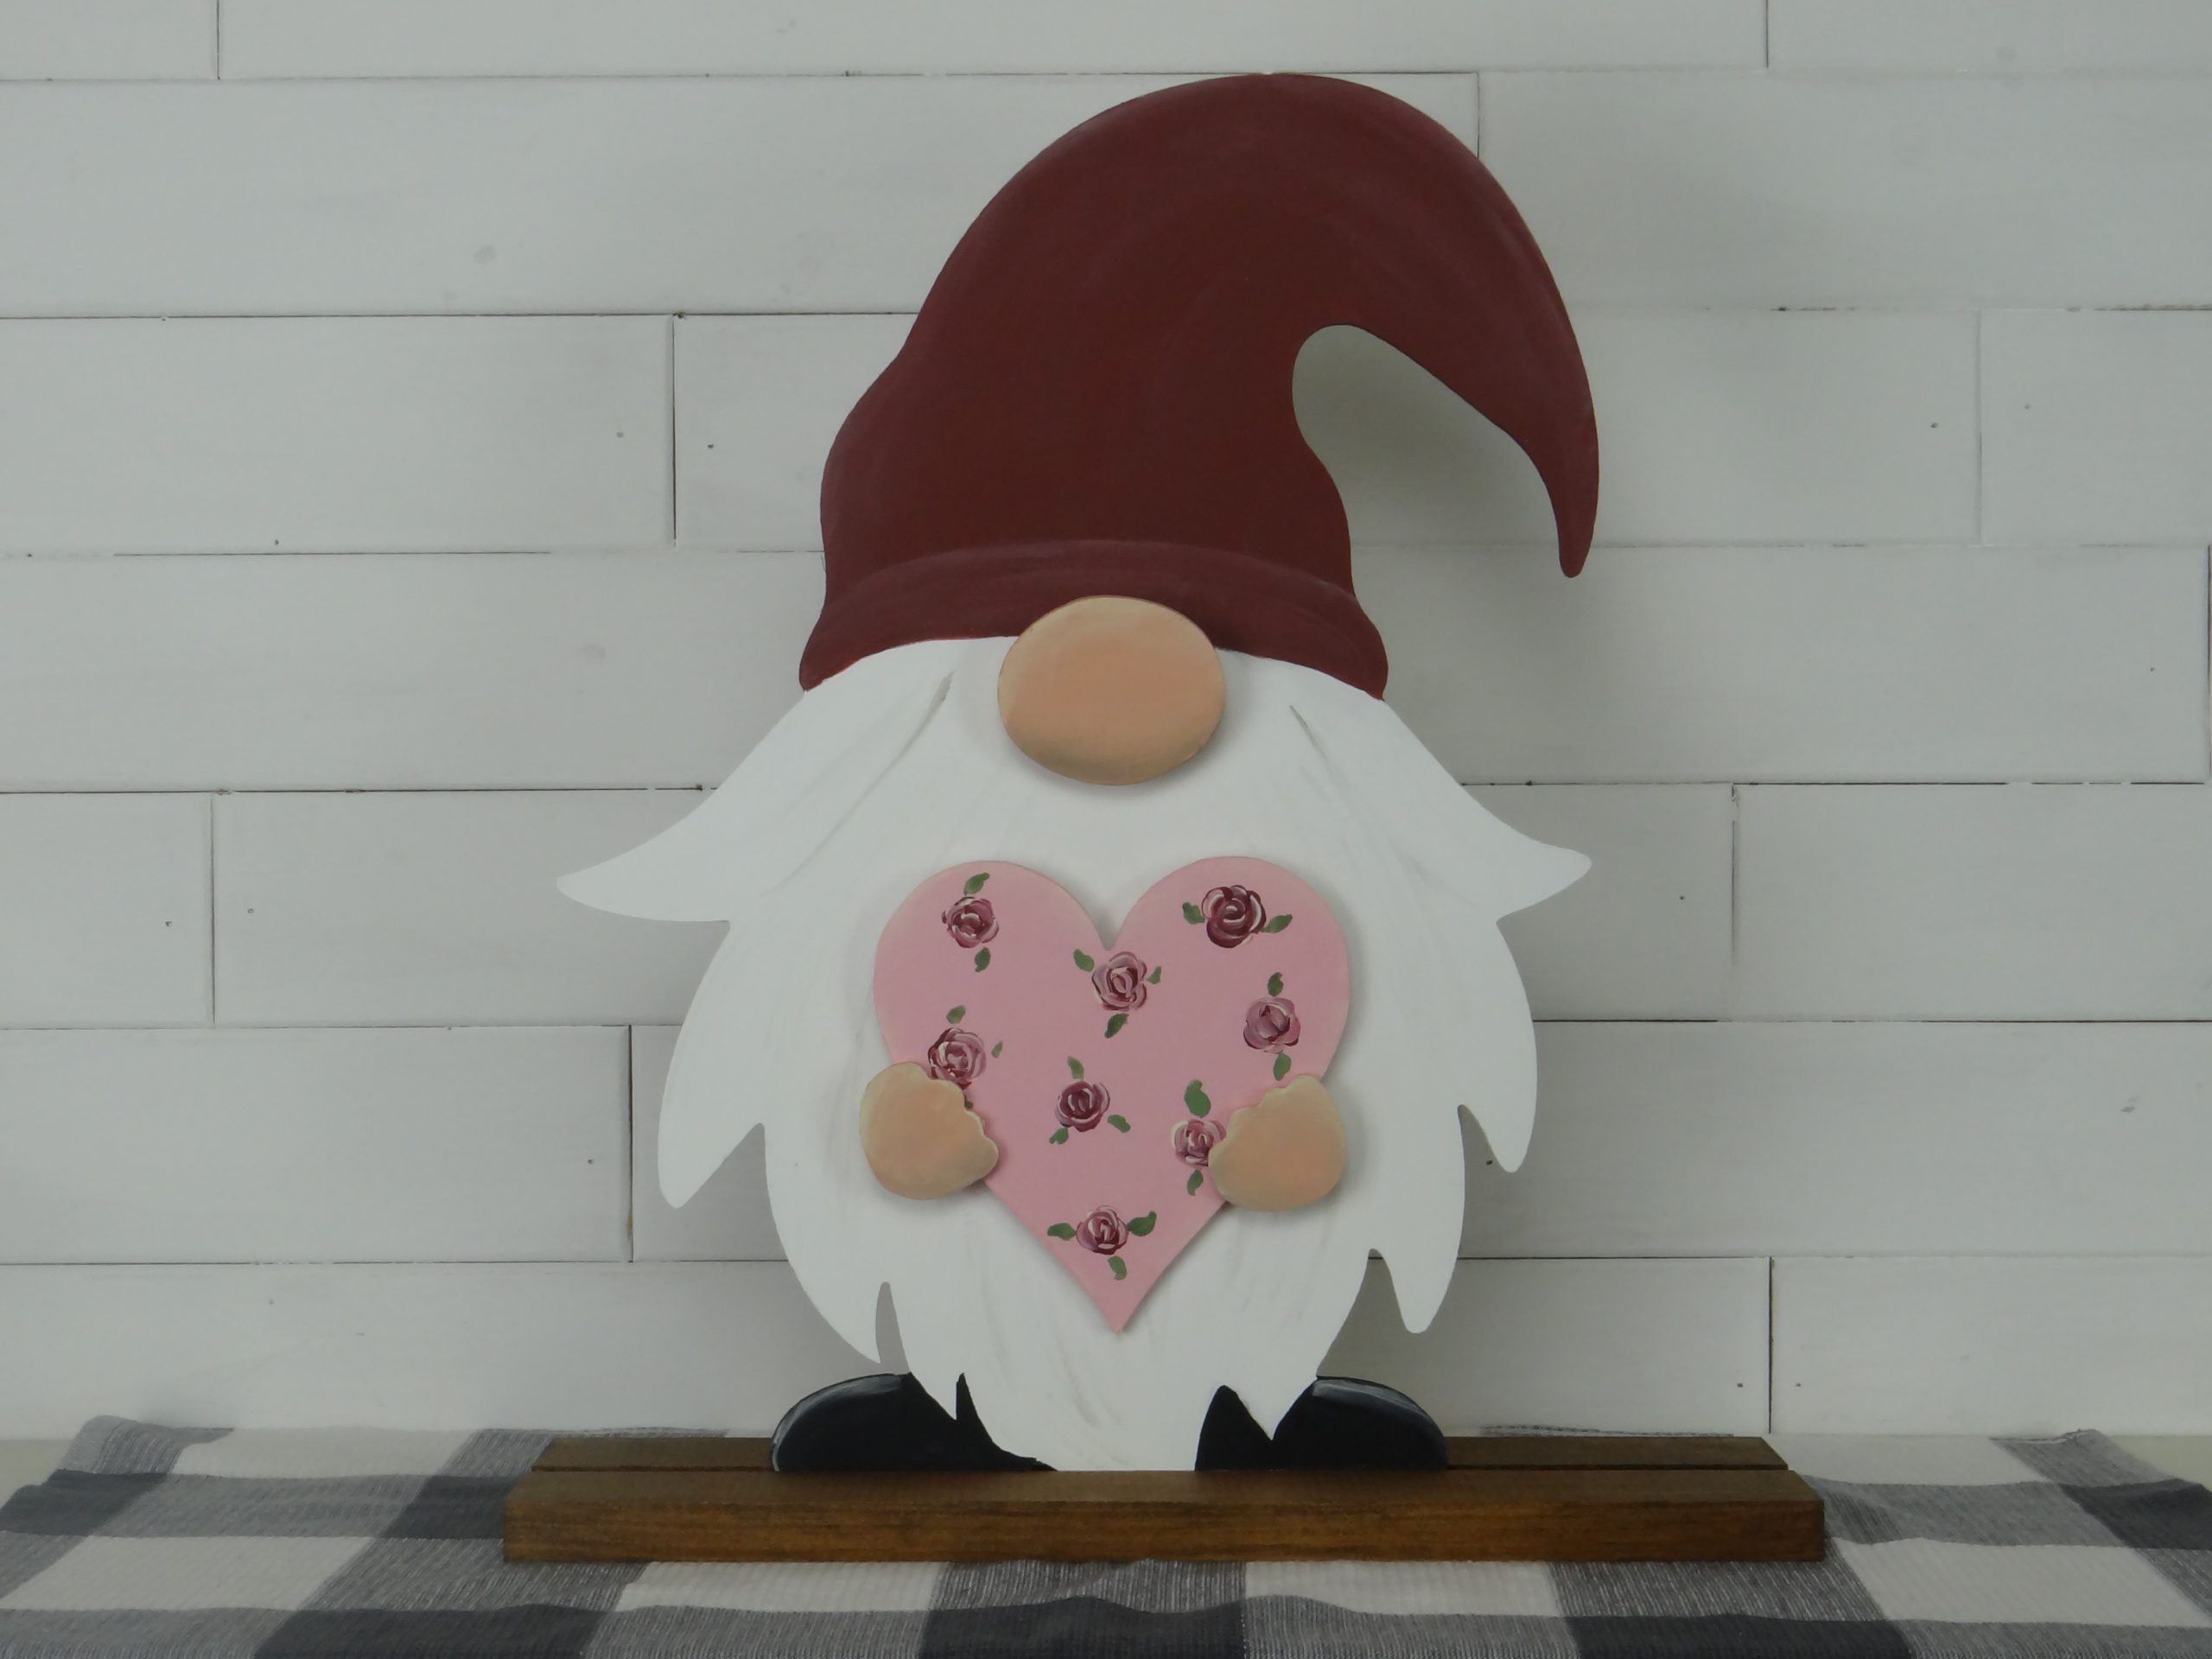 Buy Gnome Statue Wood Cutout, Wooden Shape, Unfinished Craft